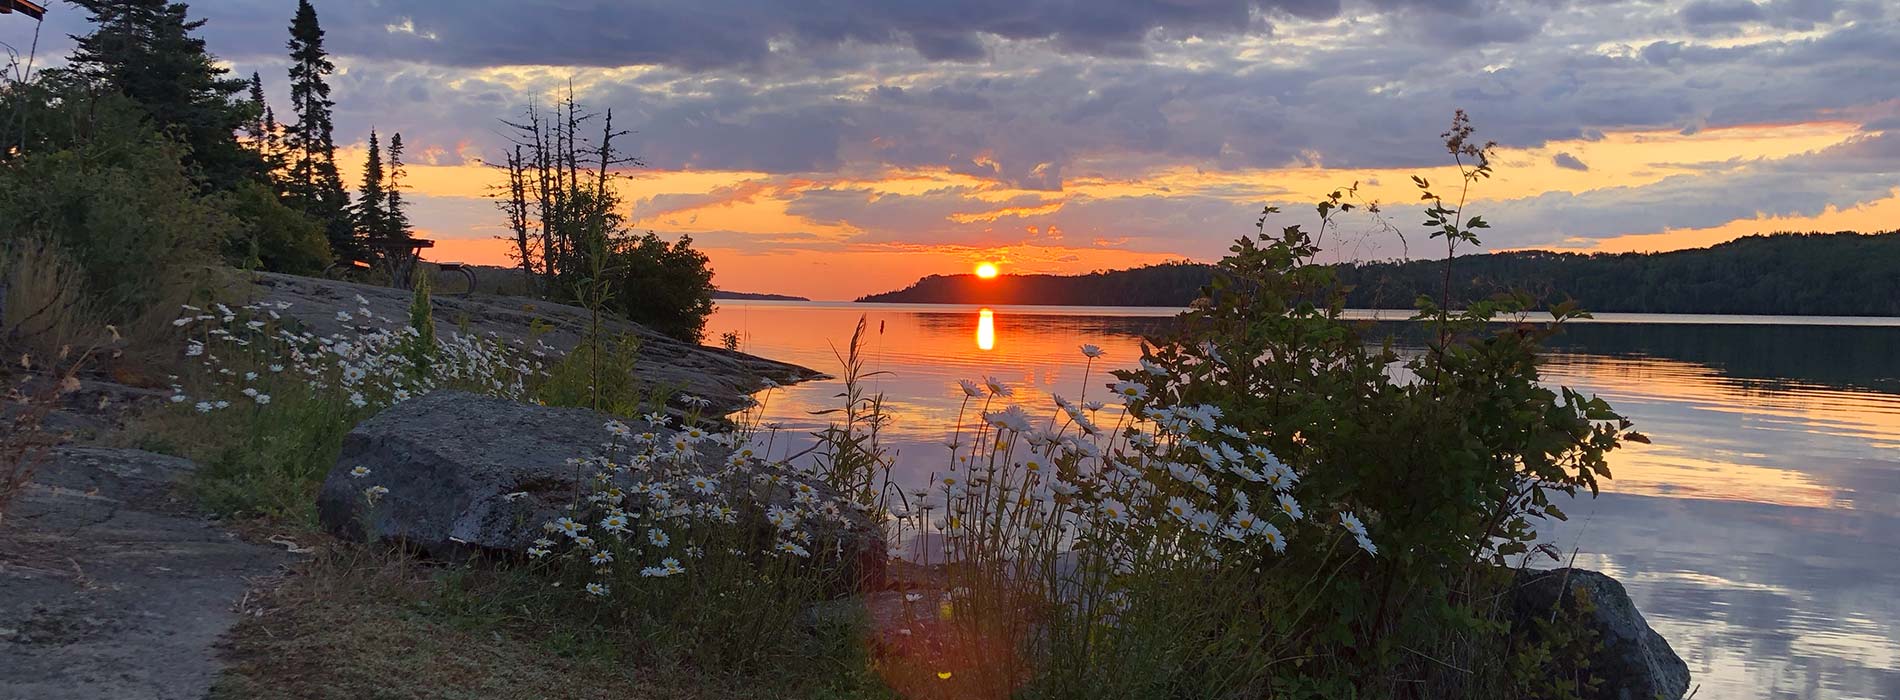 A brilliant orange sunset on Isle Royale, with white daisies in the foreground.